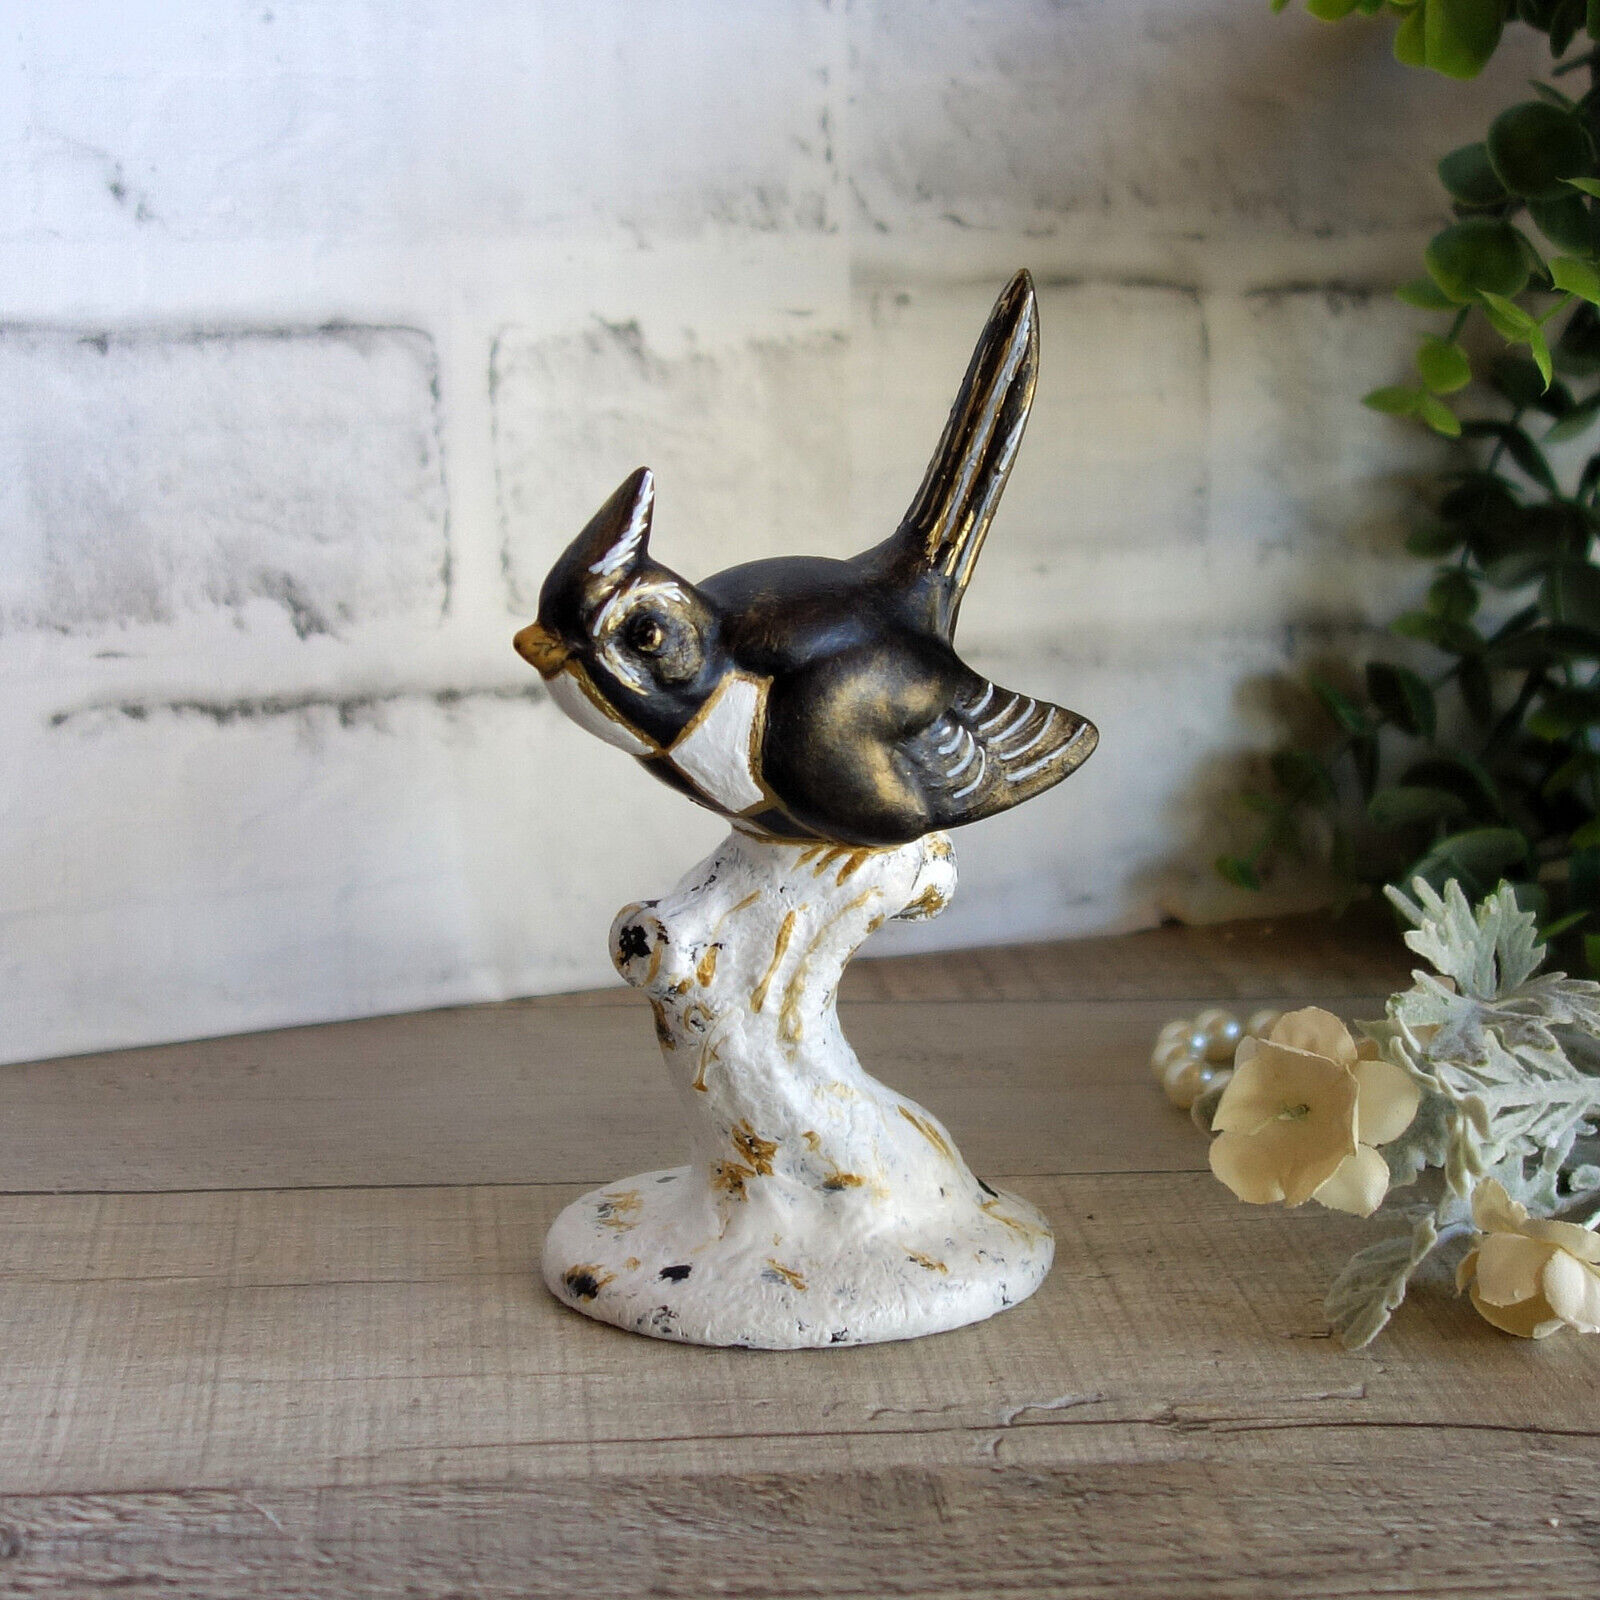 Courtly songbird black and white check bird figurine hand painted checked decor